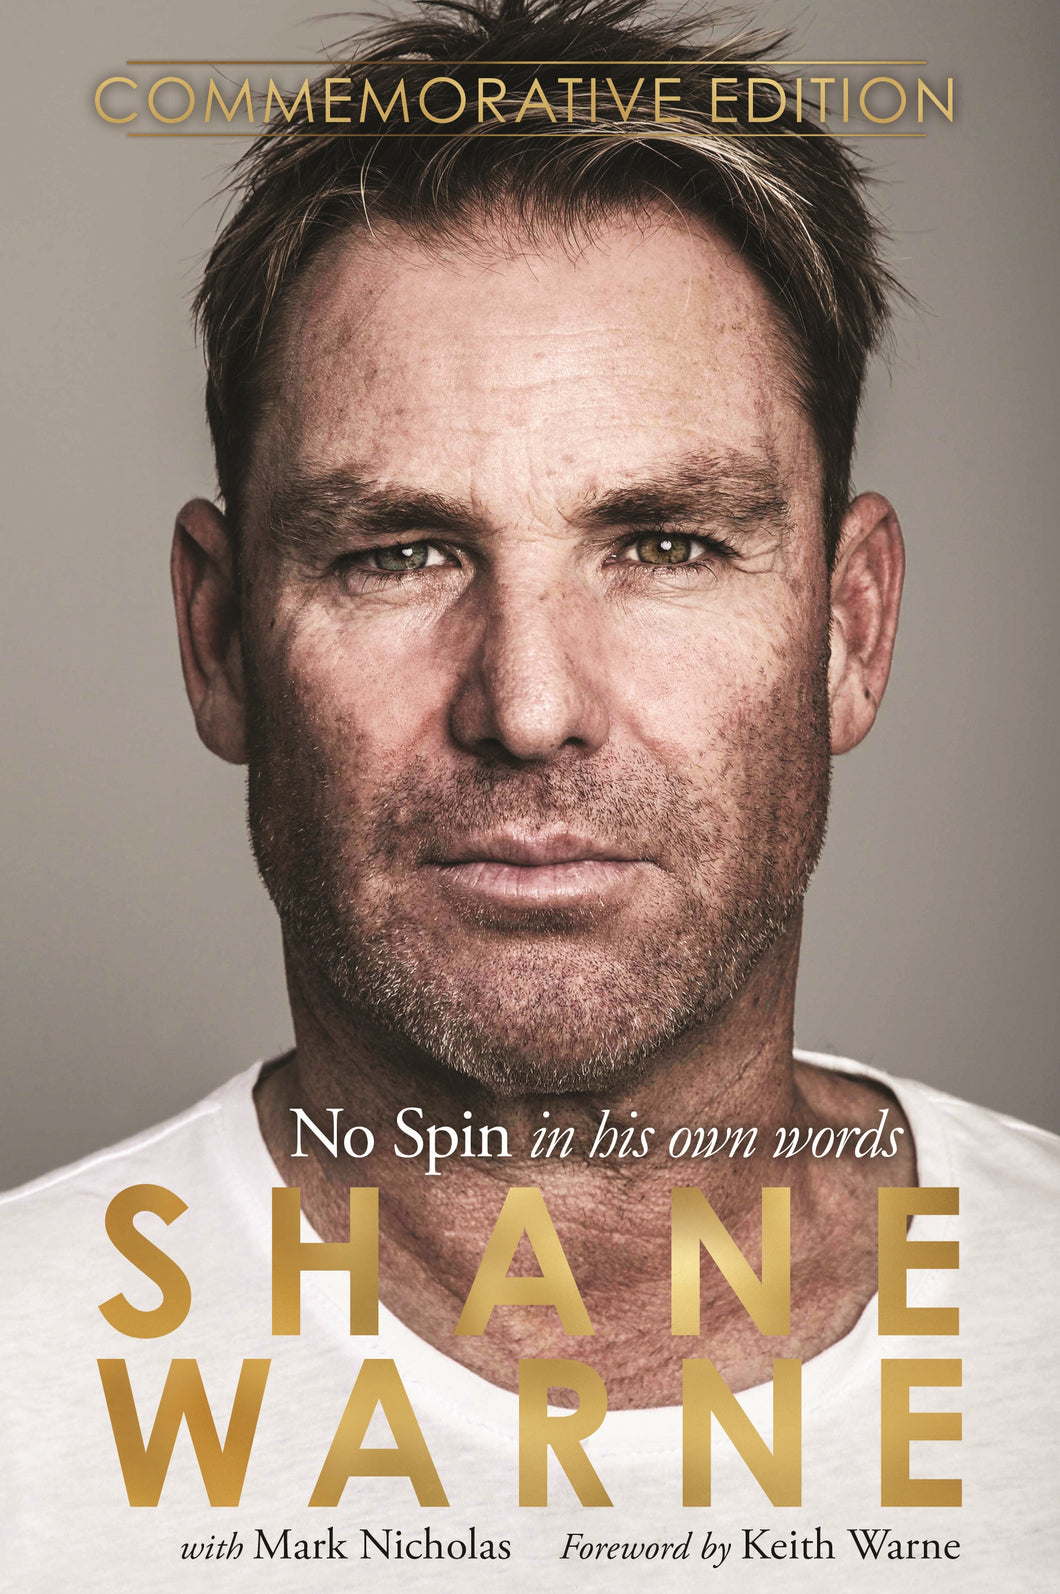 No Spin by Shane Warne